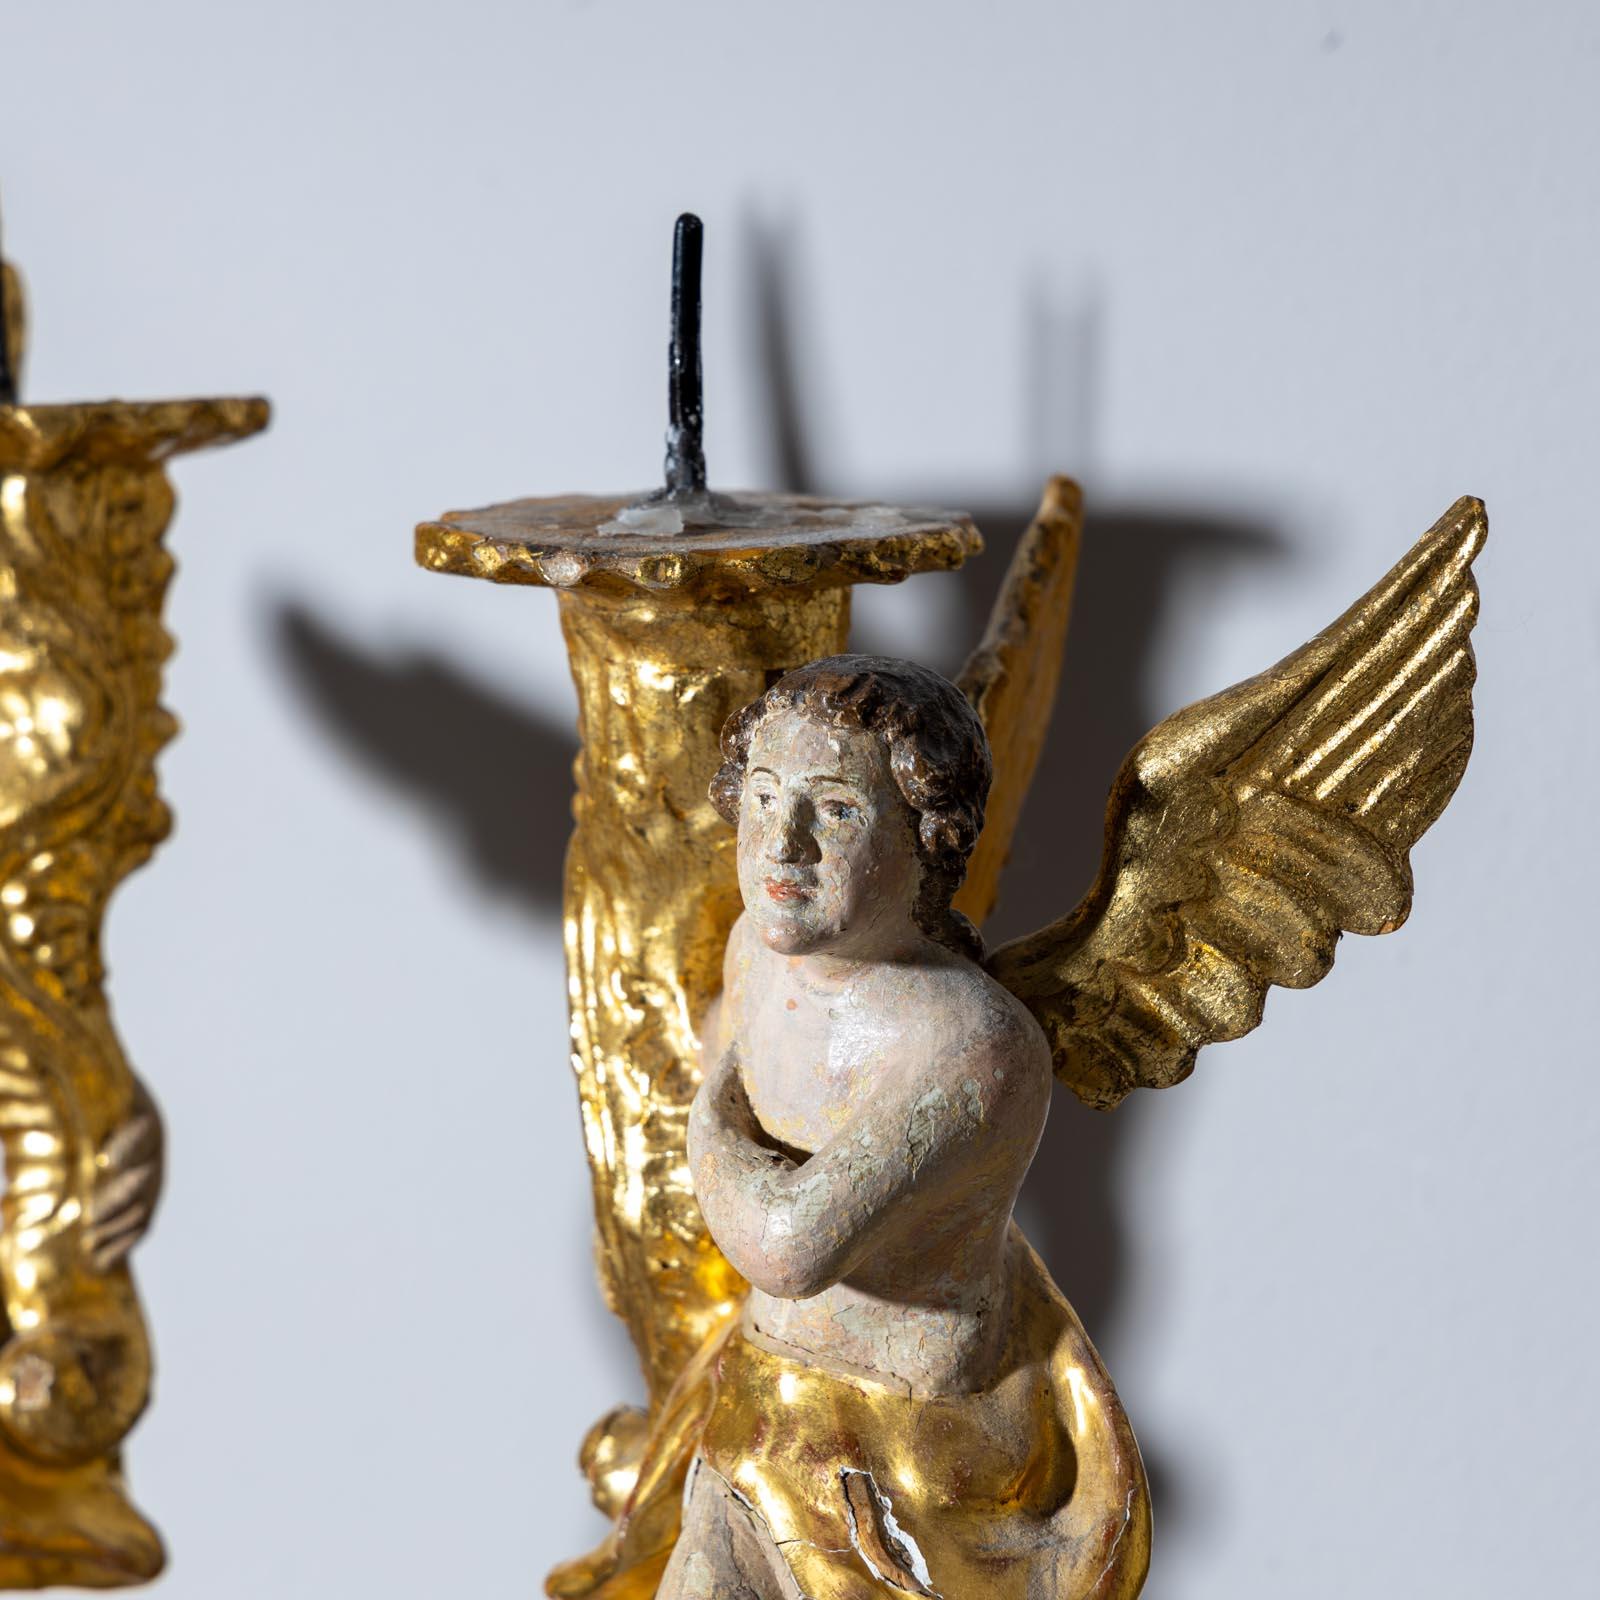 Pair of candlesticks designed in the shape of winged angels. The angels each carry a cornucopia with an iron pin and stand on stylized clouds. The wings, the robe and the candlesticks are gold-patinated. The polychrome setting of the candlesticks is